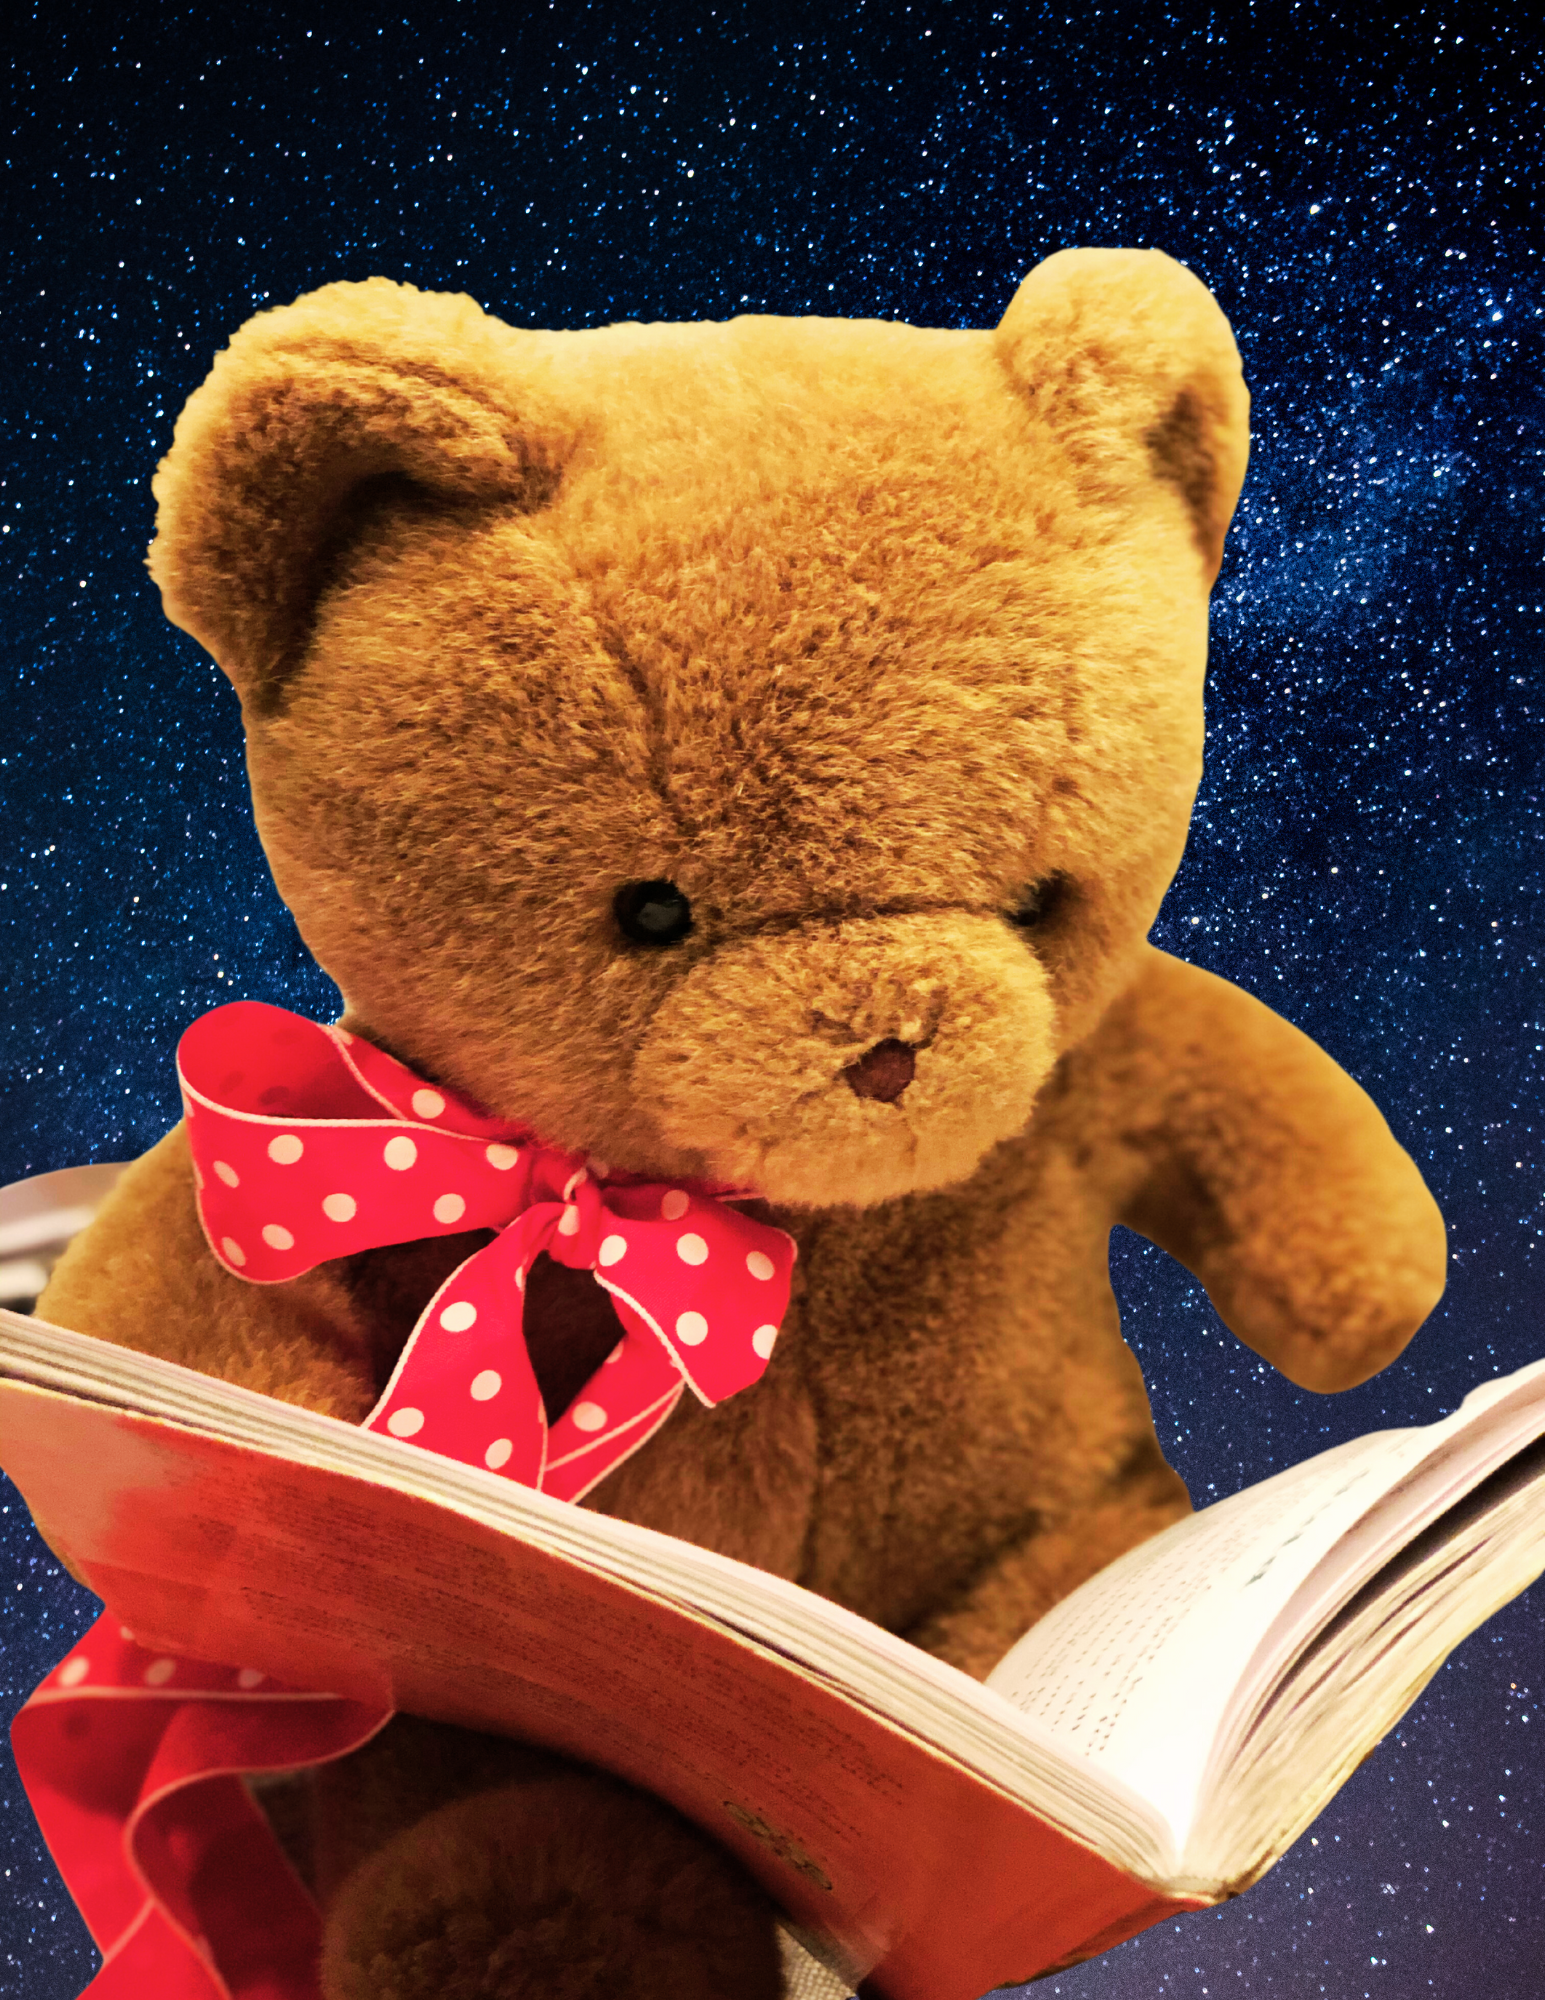 A teddy bear reads a book with a starry nighttime background.